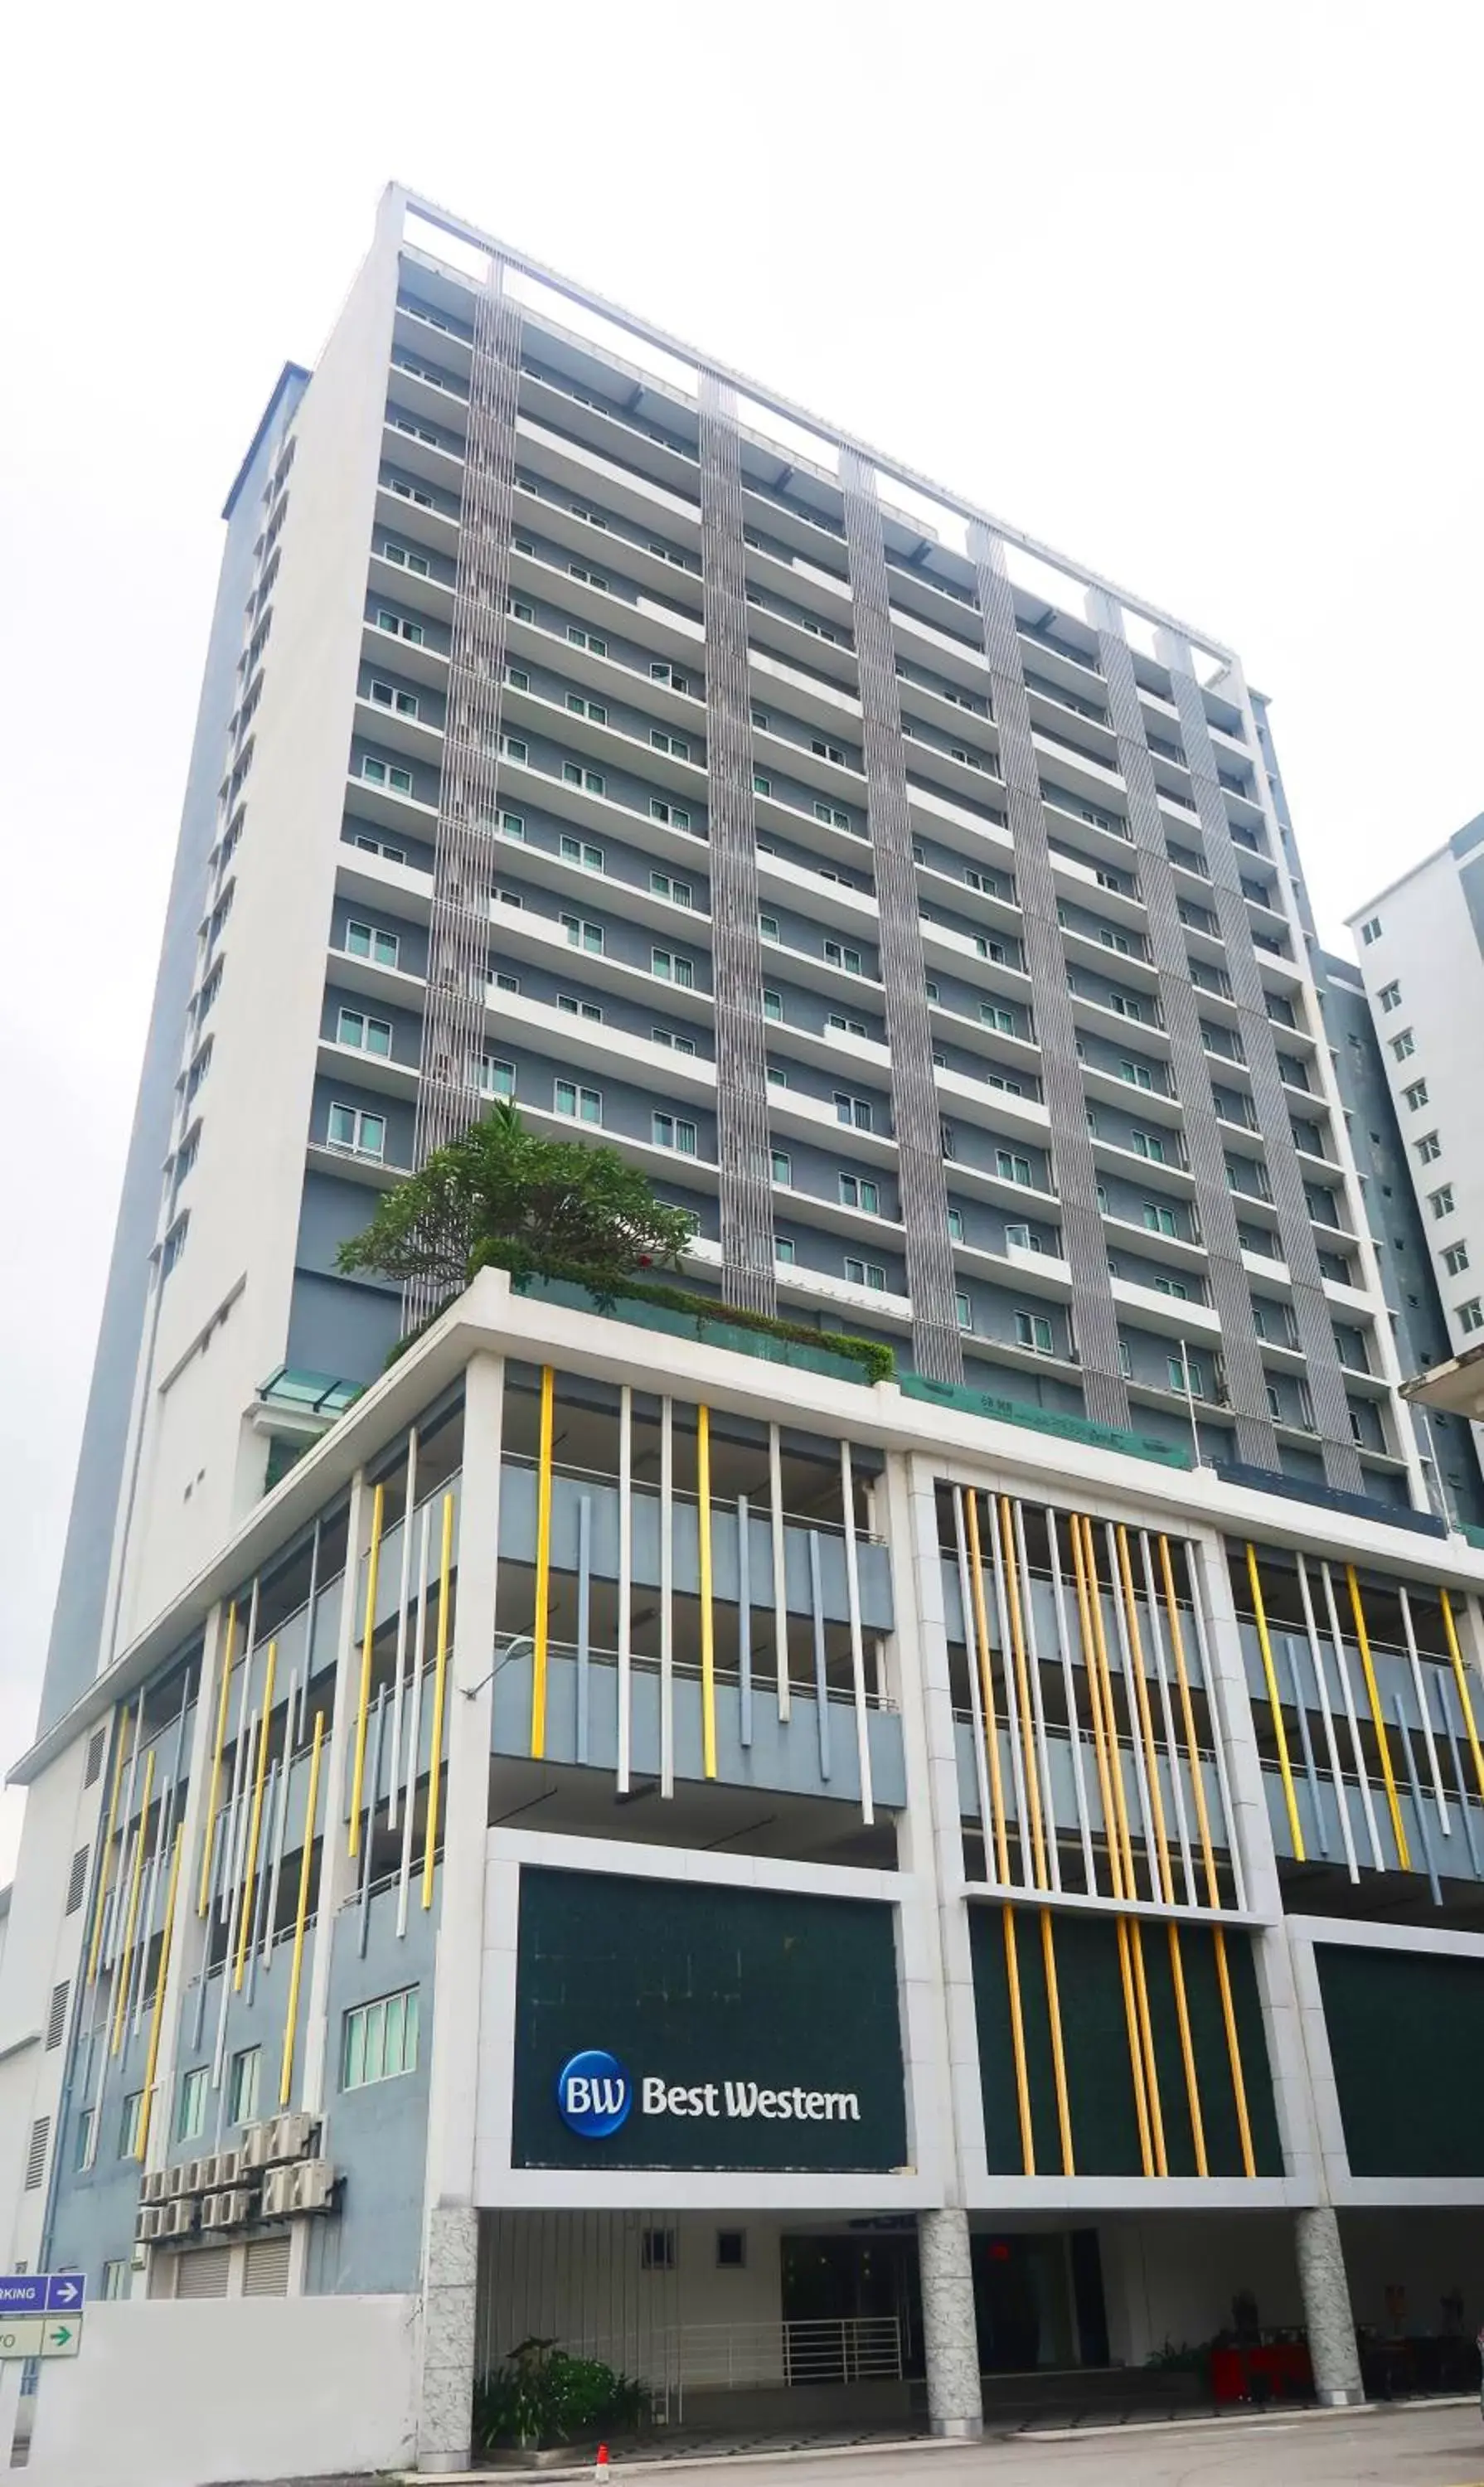 Property Building in Best Western i-City Shah Alam